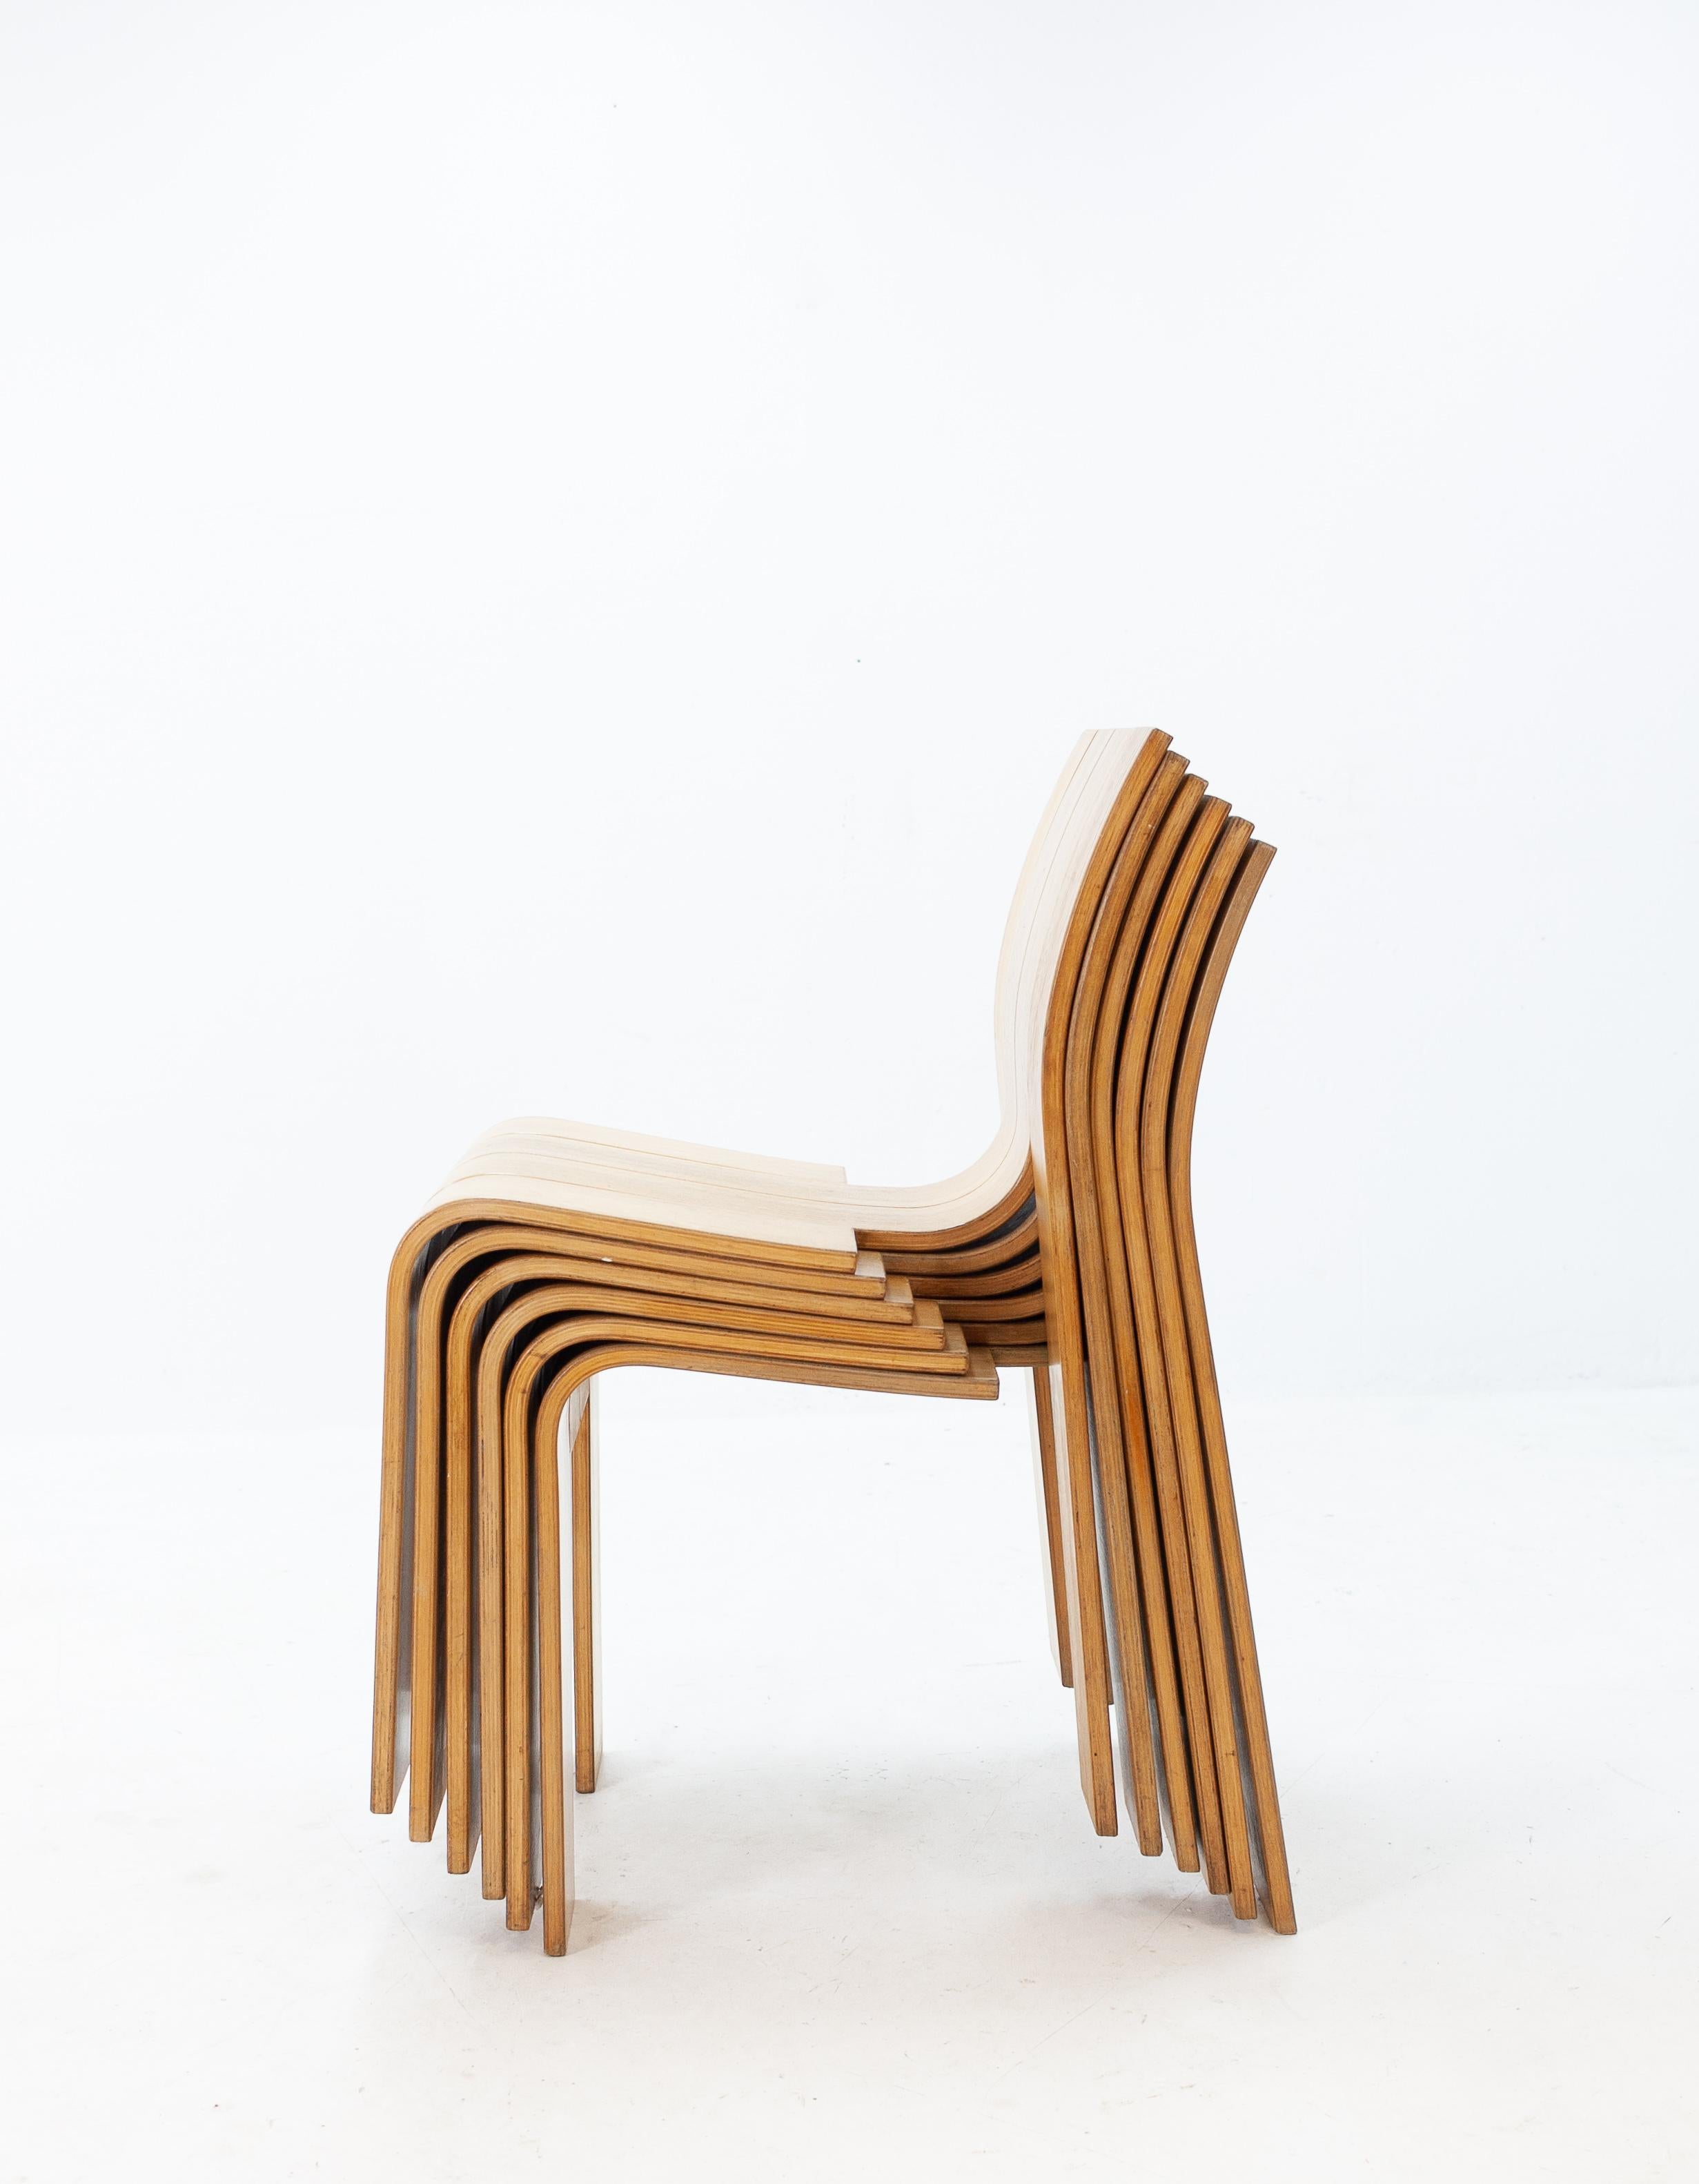 Strip chair design Gijs Bakker for Castellijn, 1974 Dutch

The underlying idea was to reduce the complexity of the chair's form until a powerful image remained. The chair is made of 6 strips of laminated beechwood 11 cm wide, linked by dowels. The